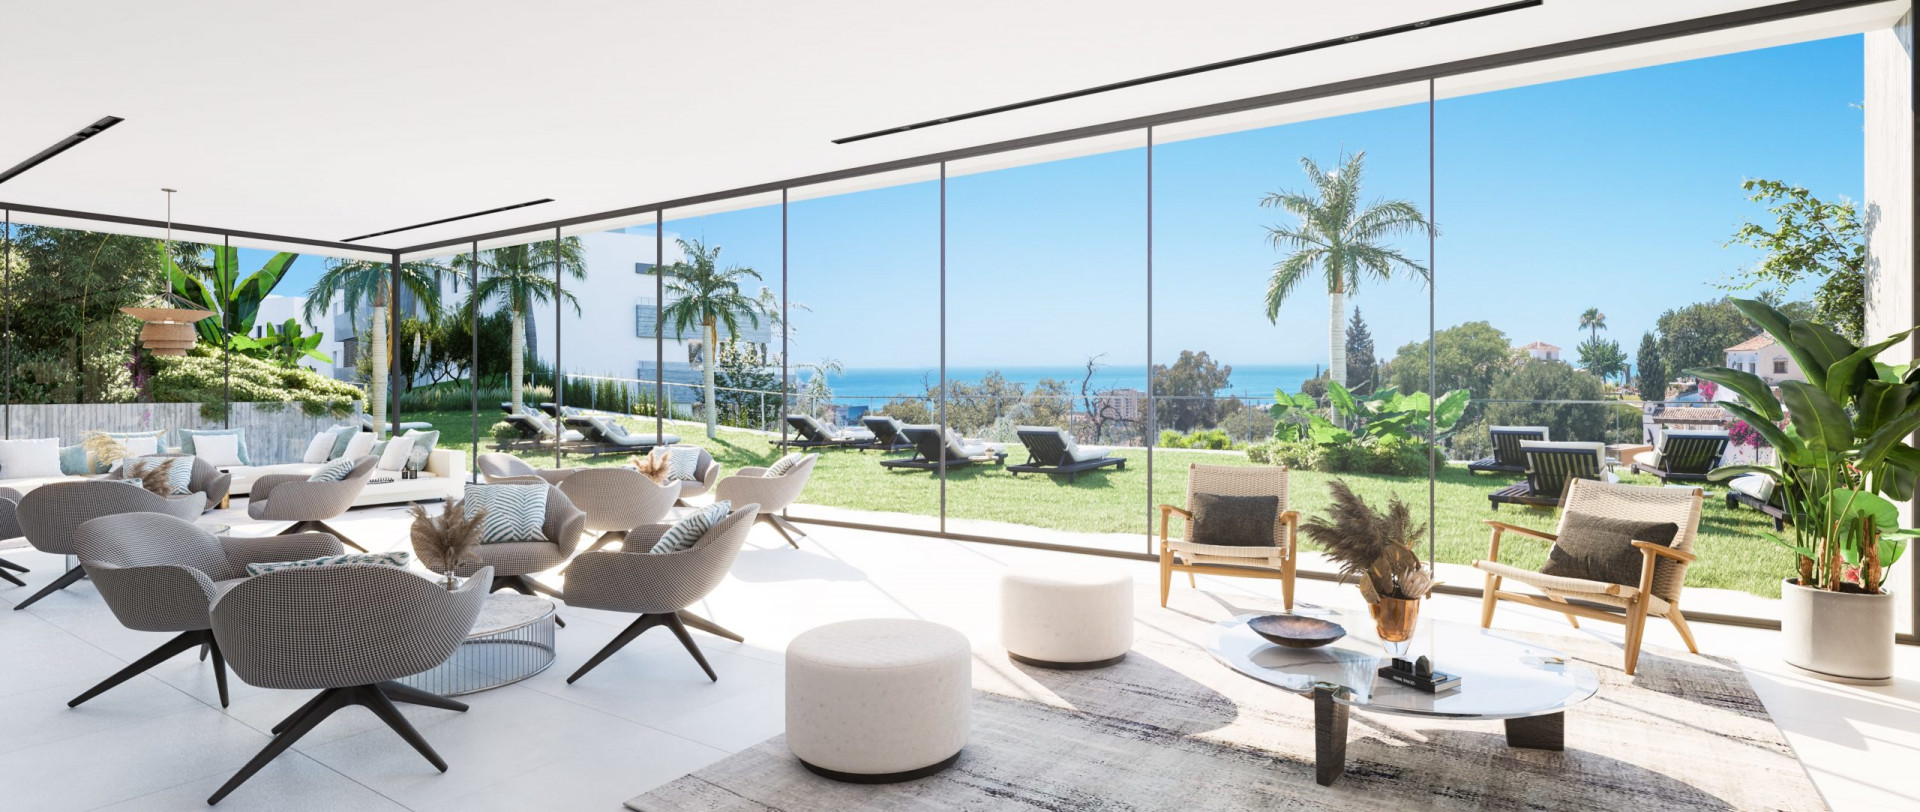 Three bedroom penthouse with solarium and panoramic views of the coastline east of Marbella. | Image 14